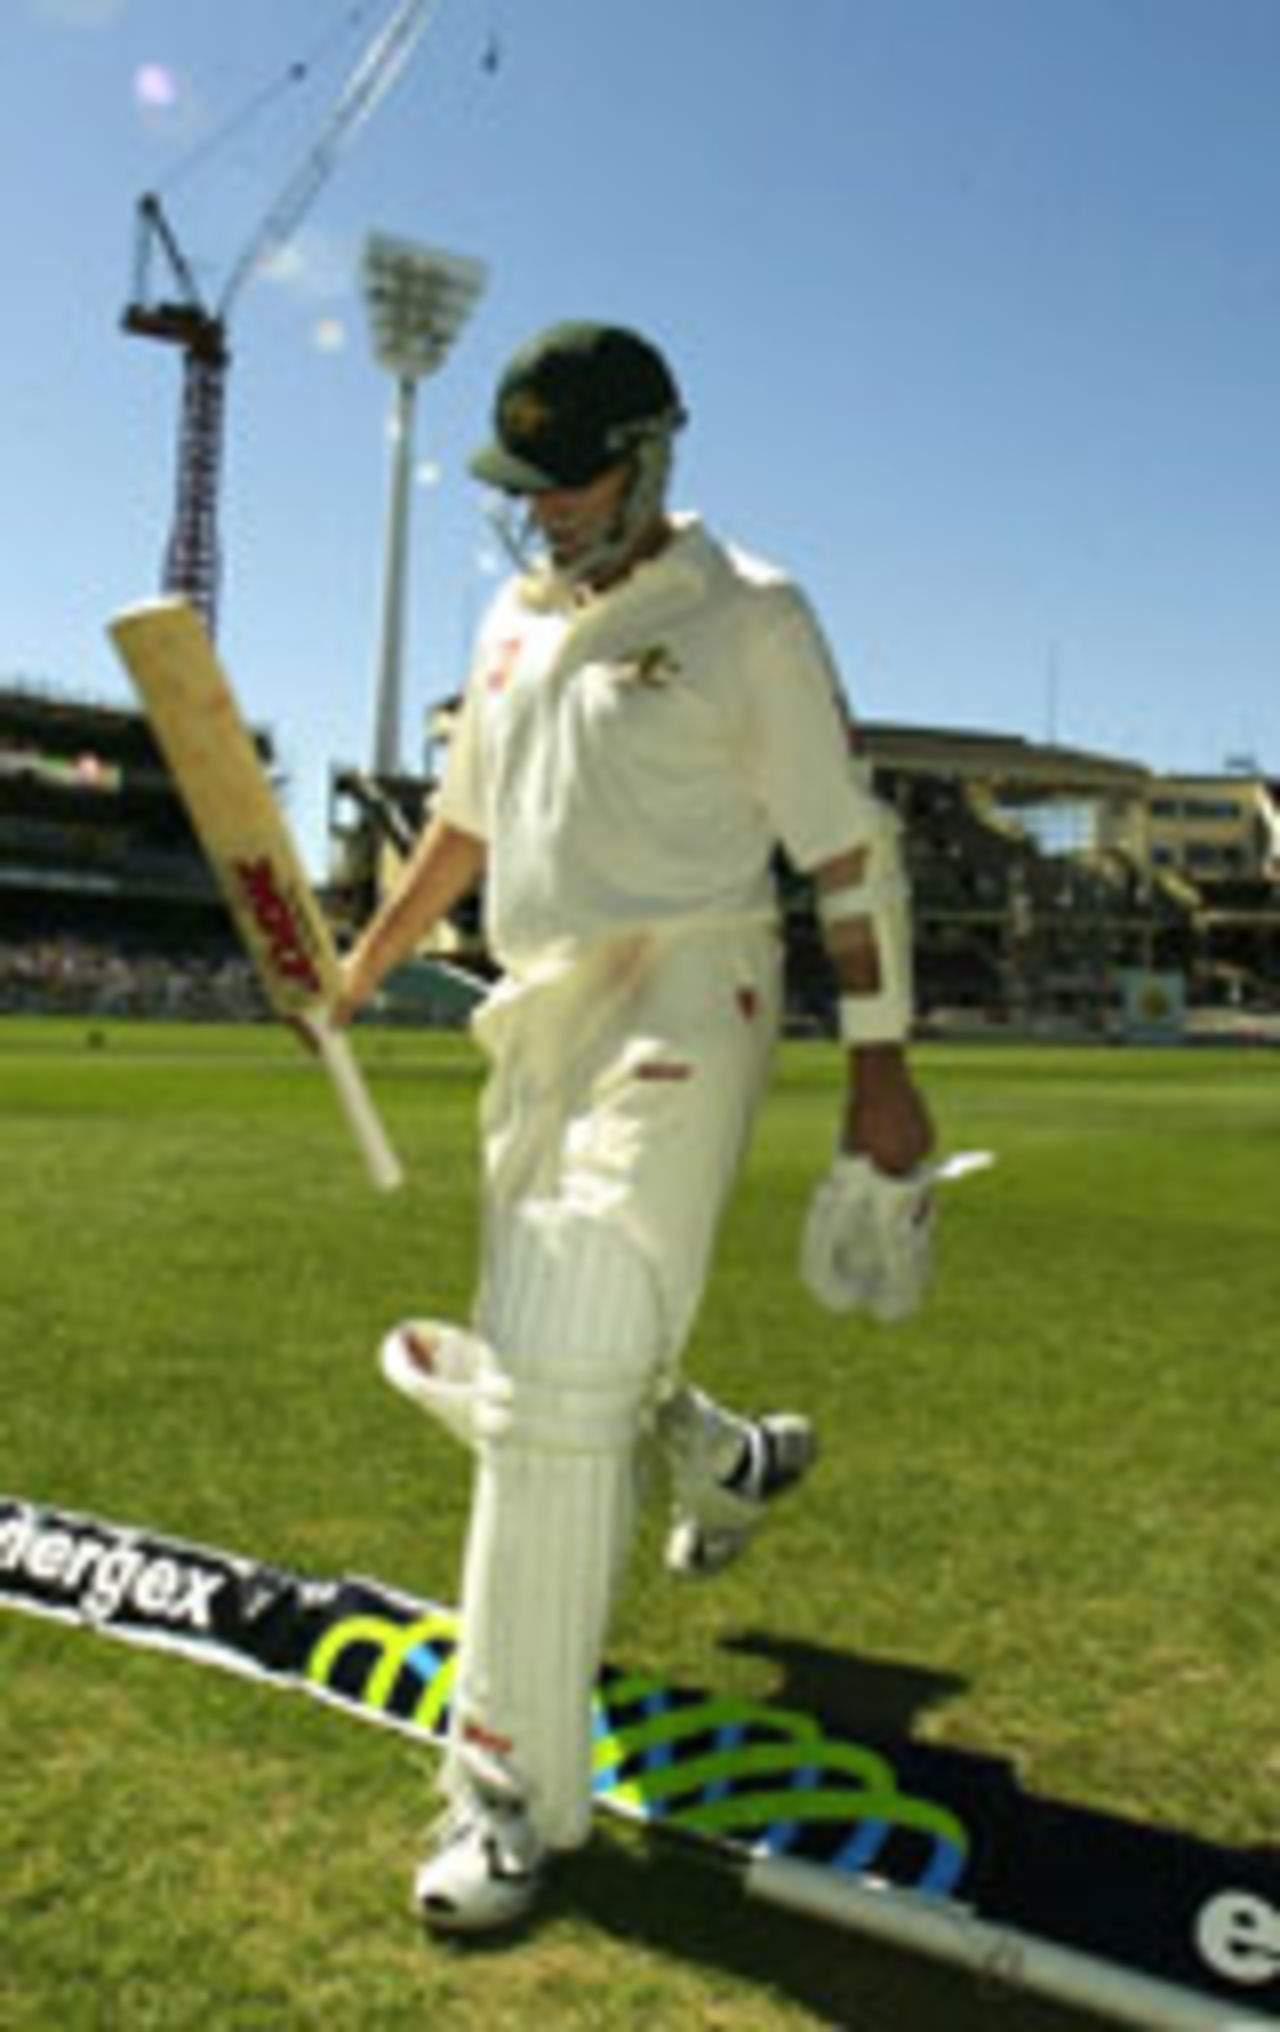 Steve Waugh walks across the boundary after being dismissed, 3rd Test, Melbourne, 3rd day, December 28, 2003